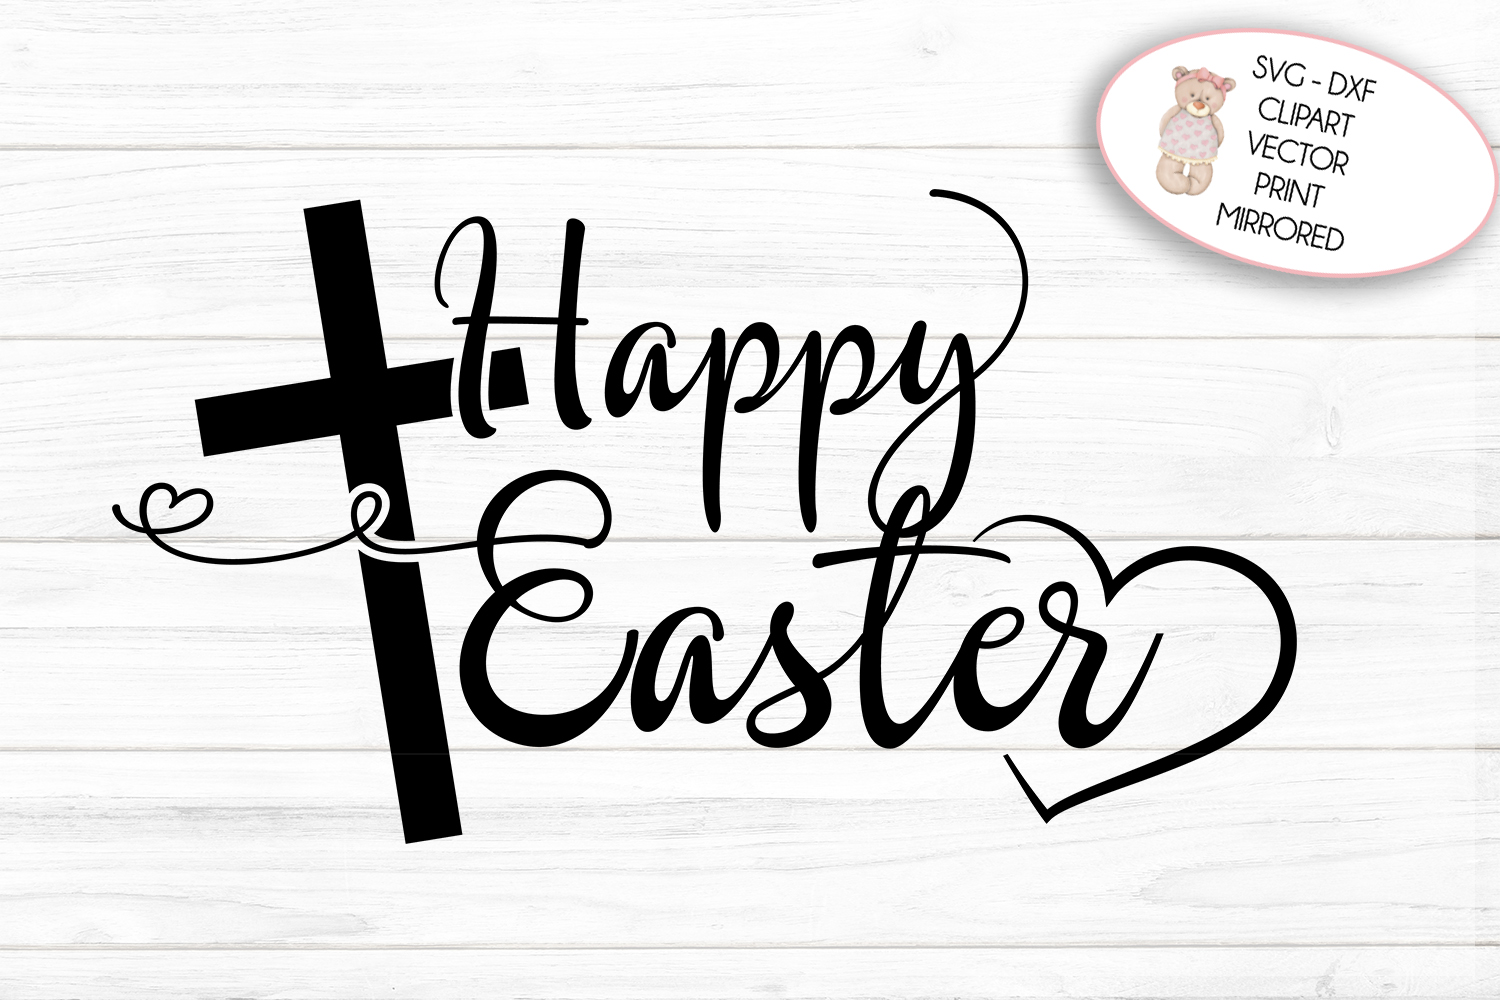 Download Happy Easter with Cross | svg cut file, clipart, print (235474) | SVGs | Design Bundles